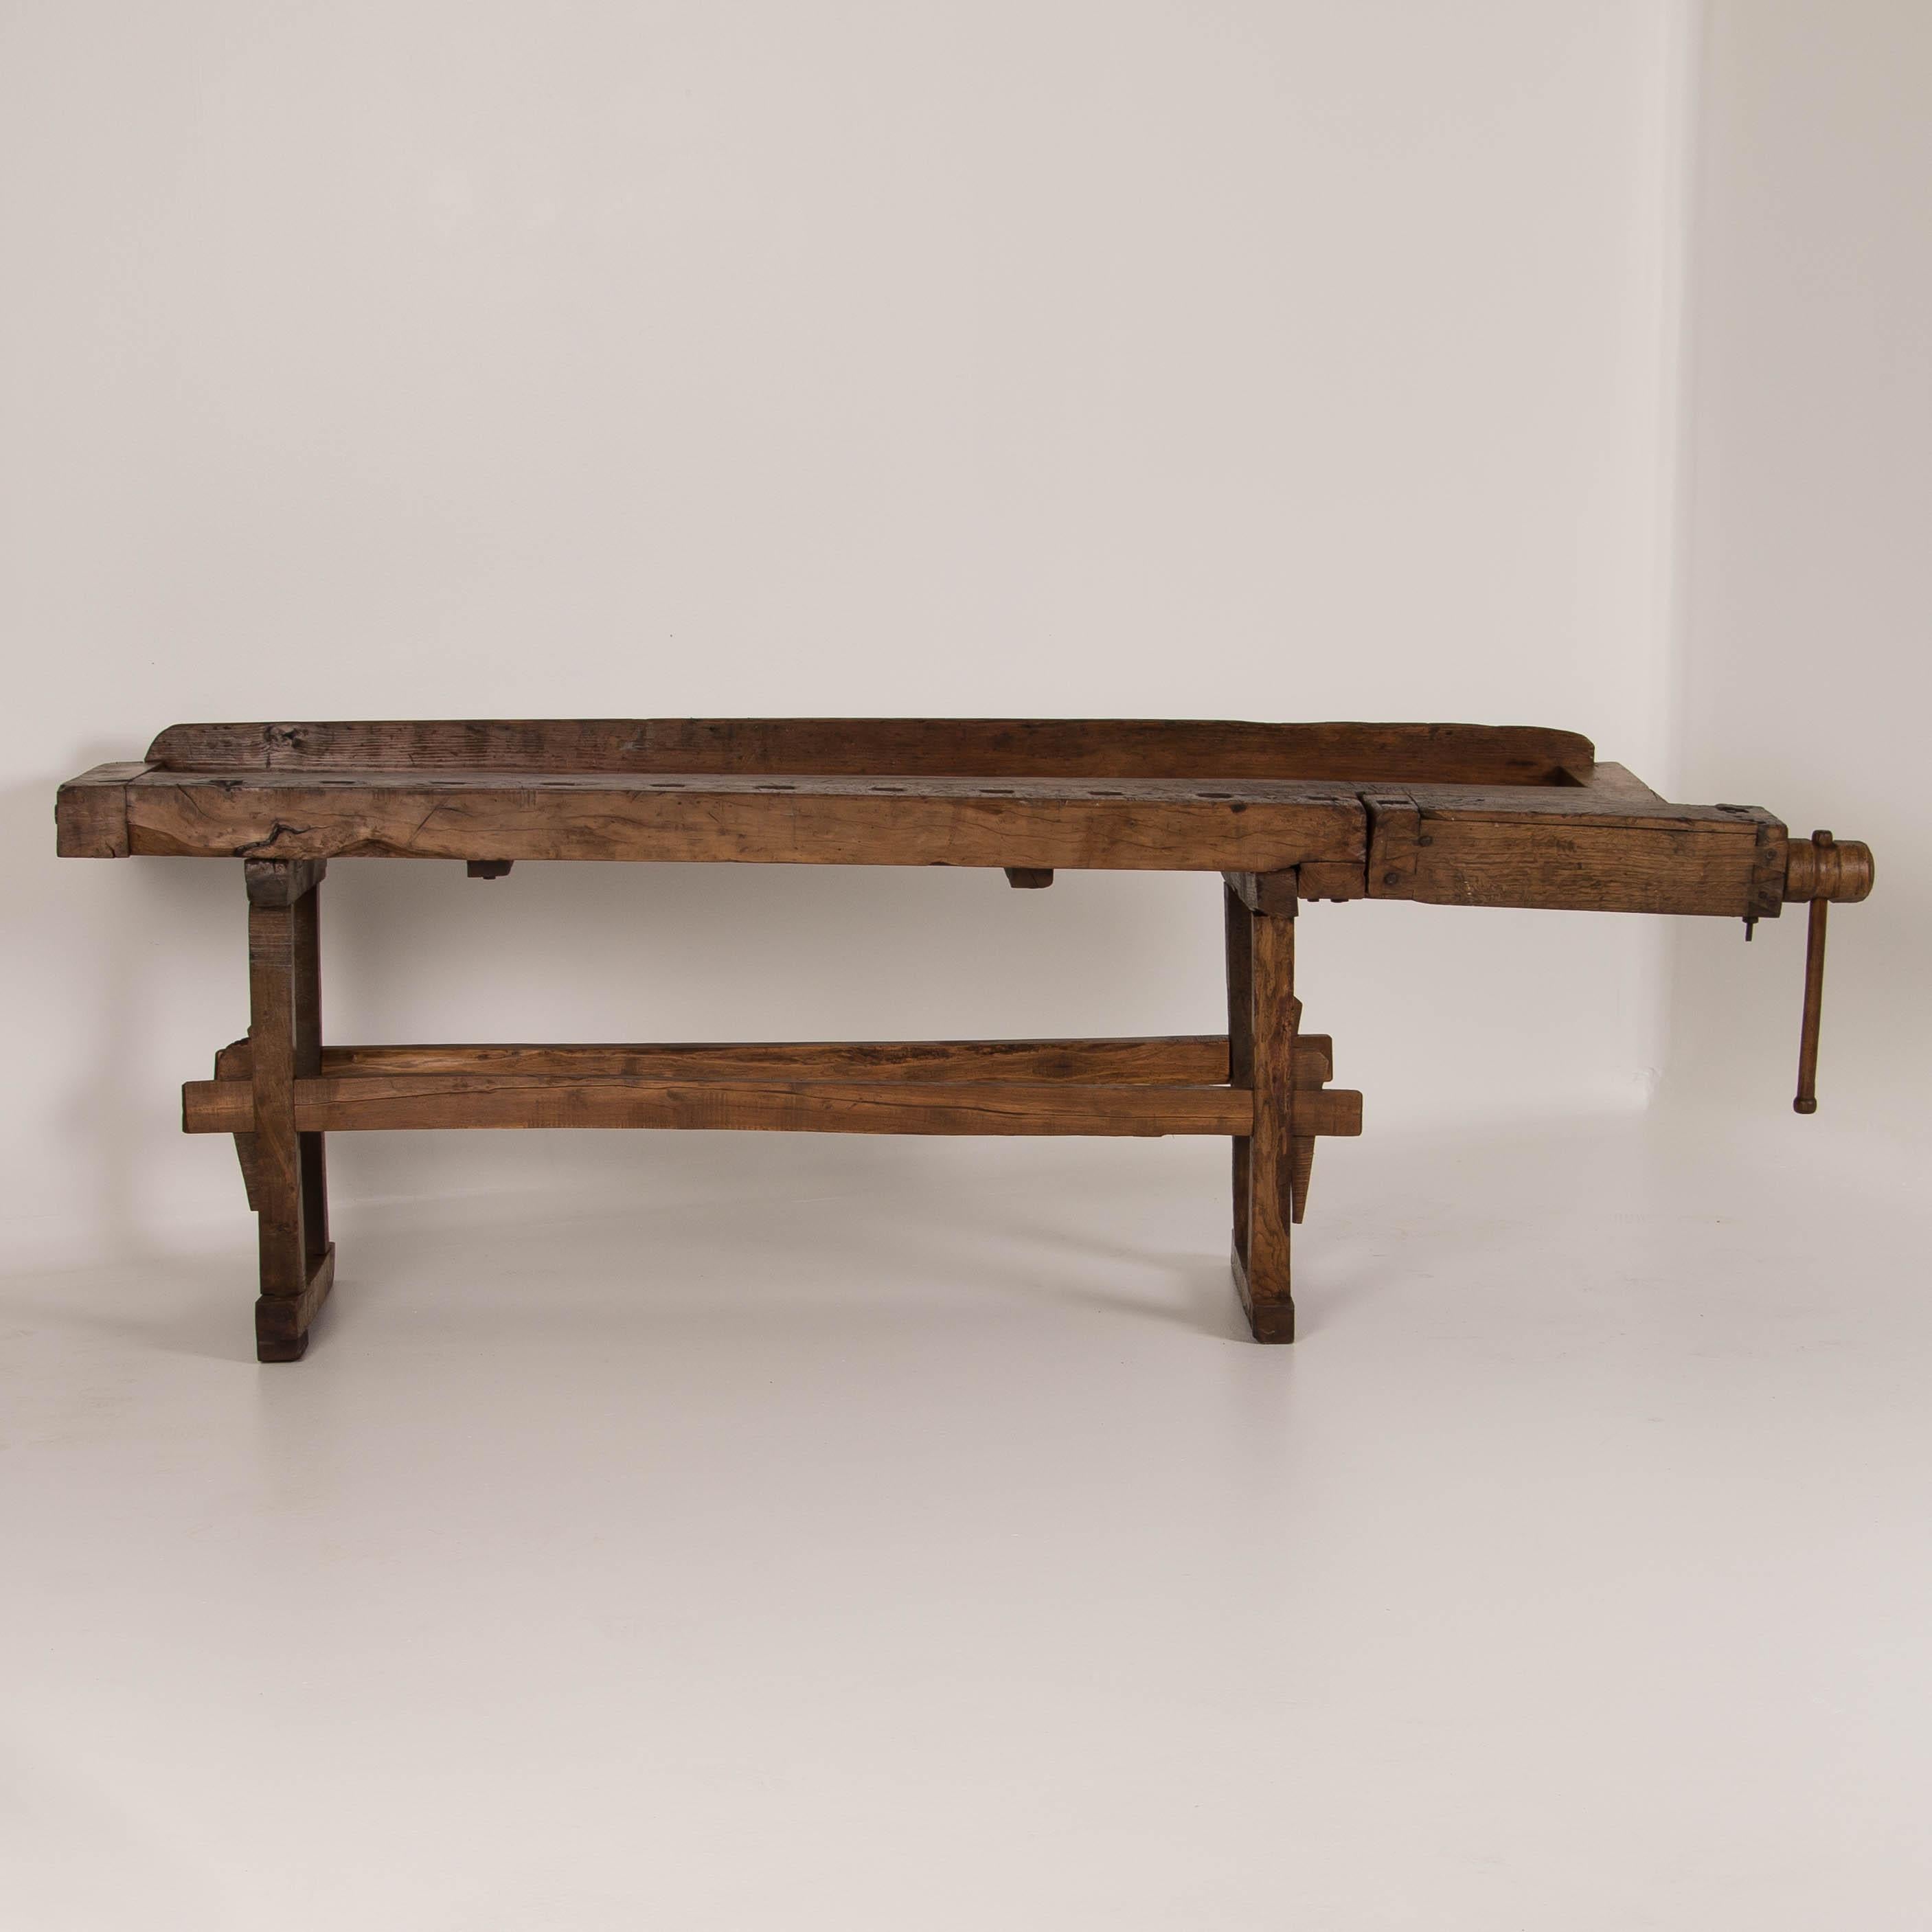 Beautiful antique carpenters workbench, bearing an incredible patina after years of traditional use, circa 1900. It has a single wood handled vice with continuous narrow table top and comes with a traditional trestle base that allows it to be